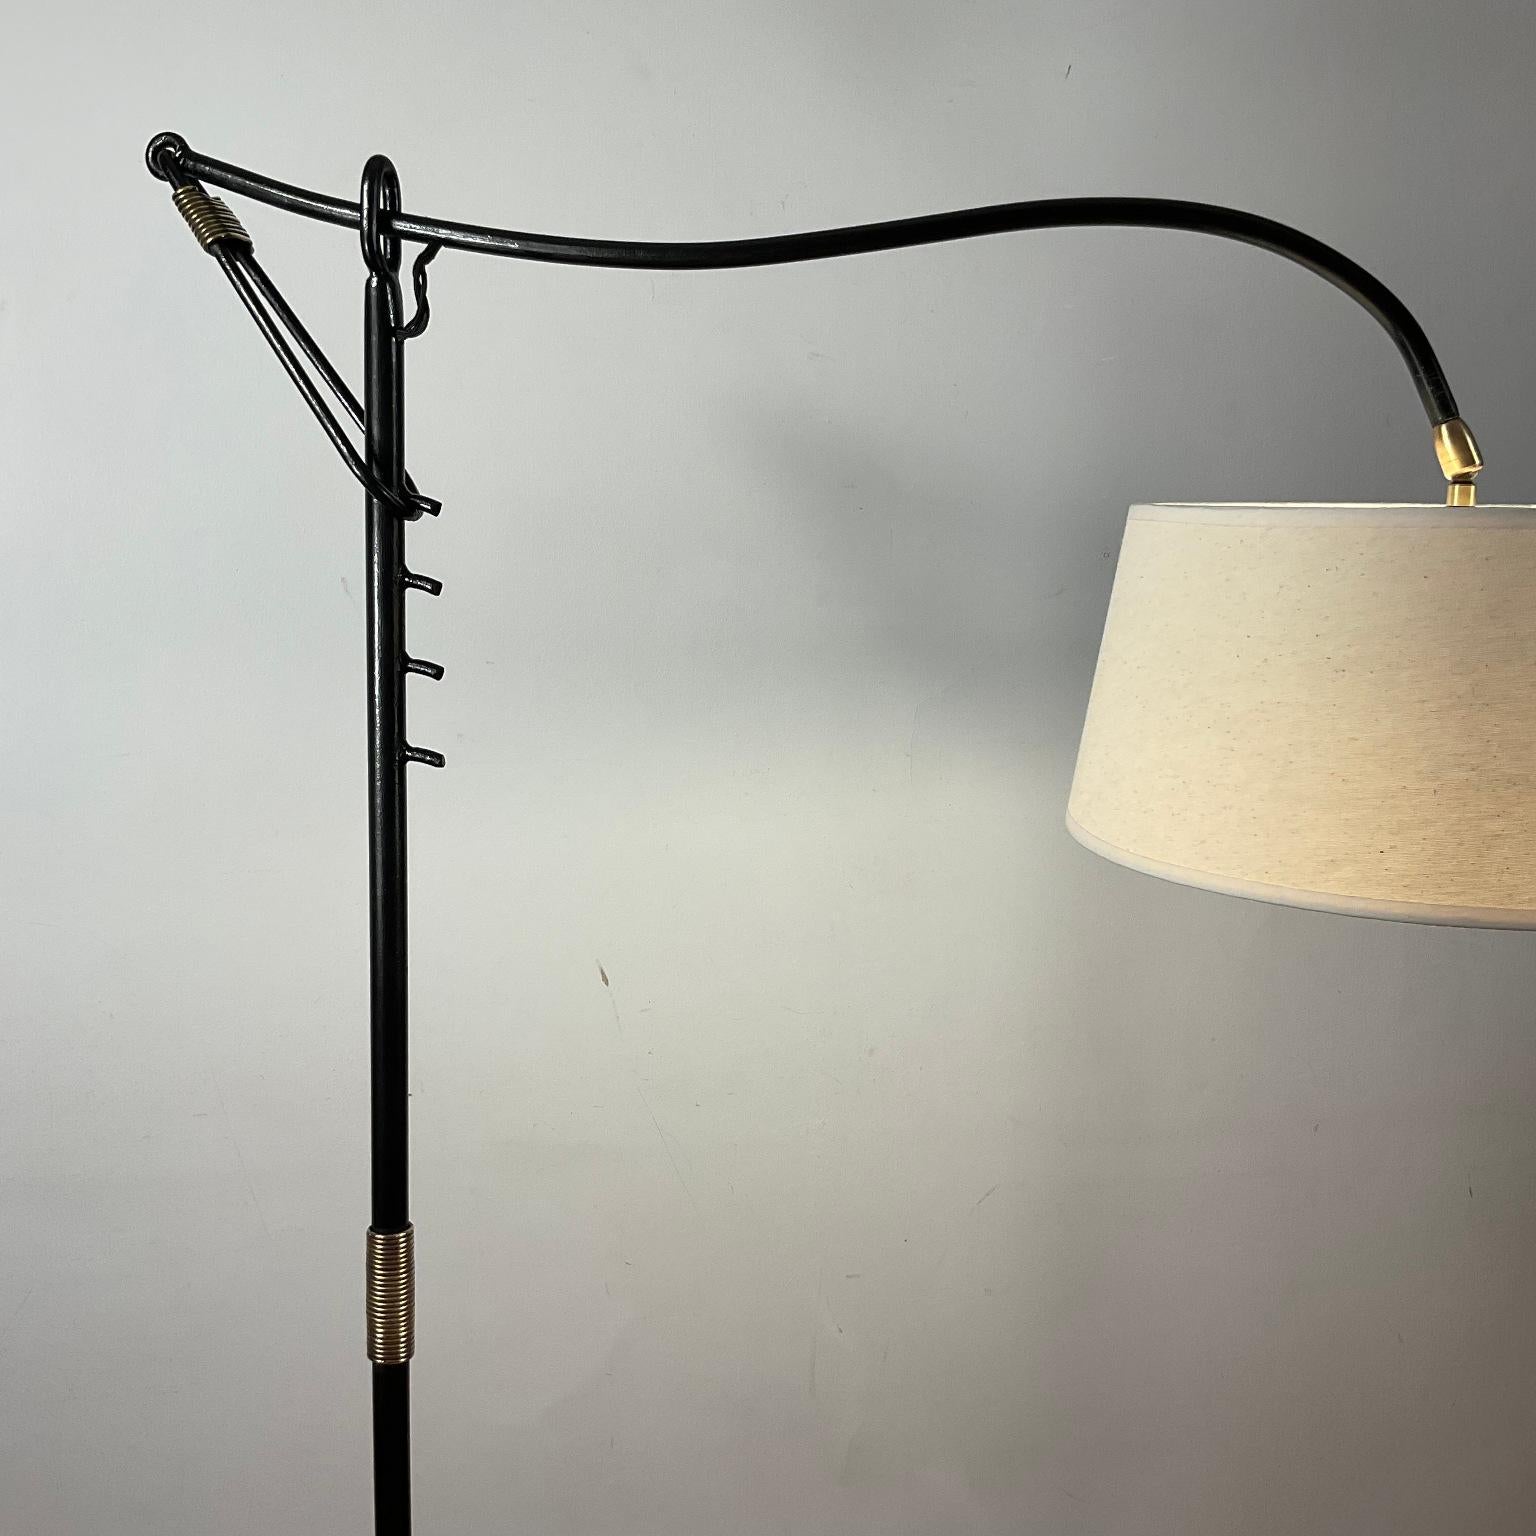 1950s Floor Lamp Attributed to Jacques Adnet with a Crémallière system For Sale 3